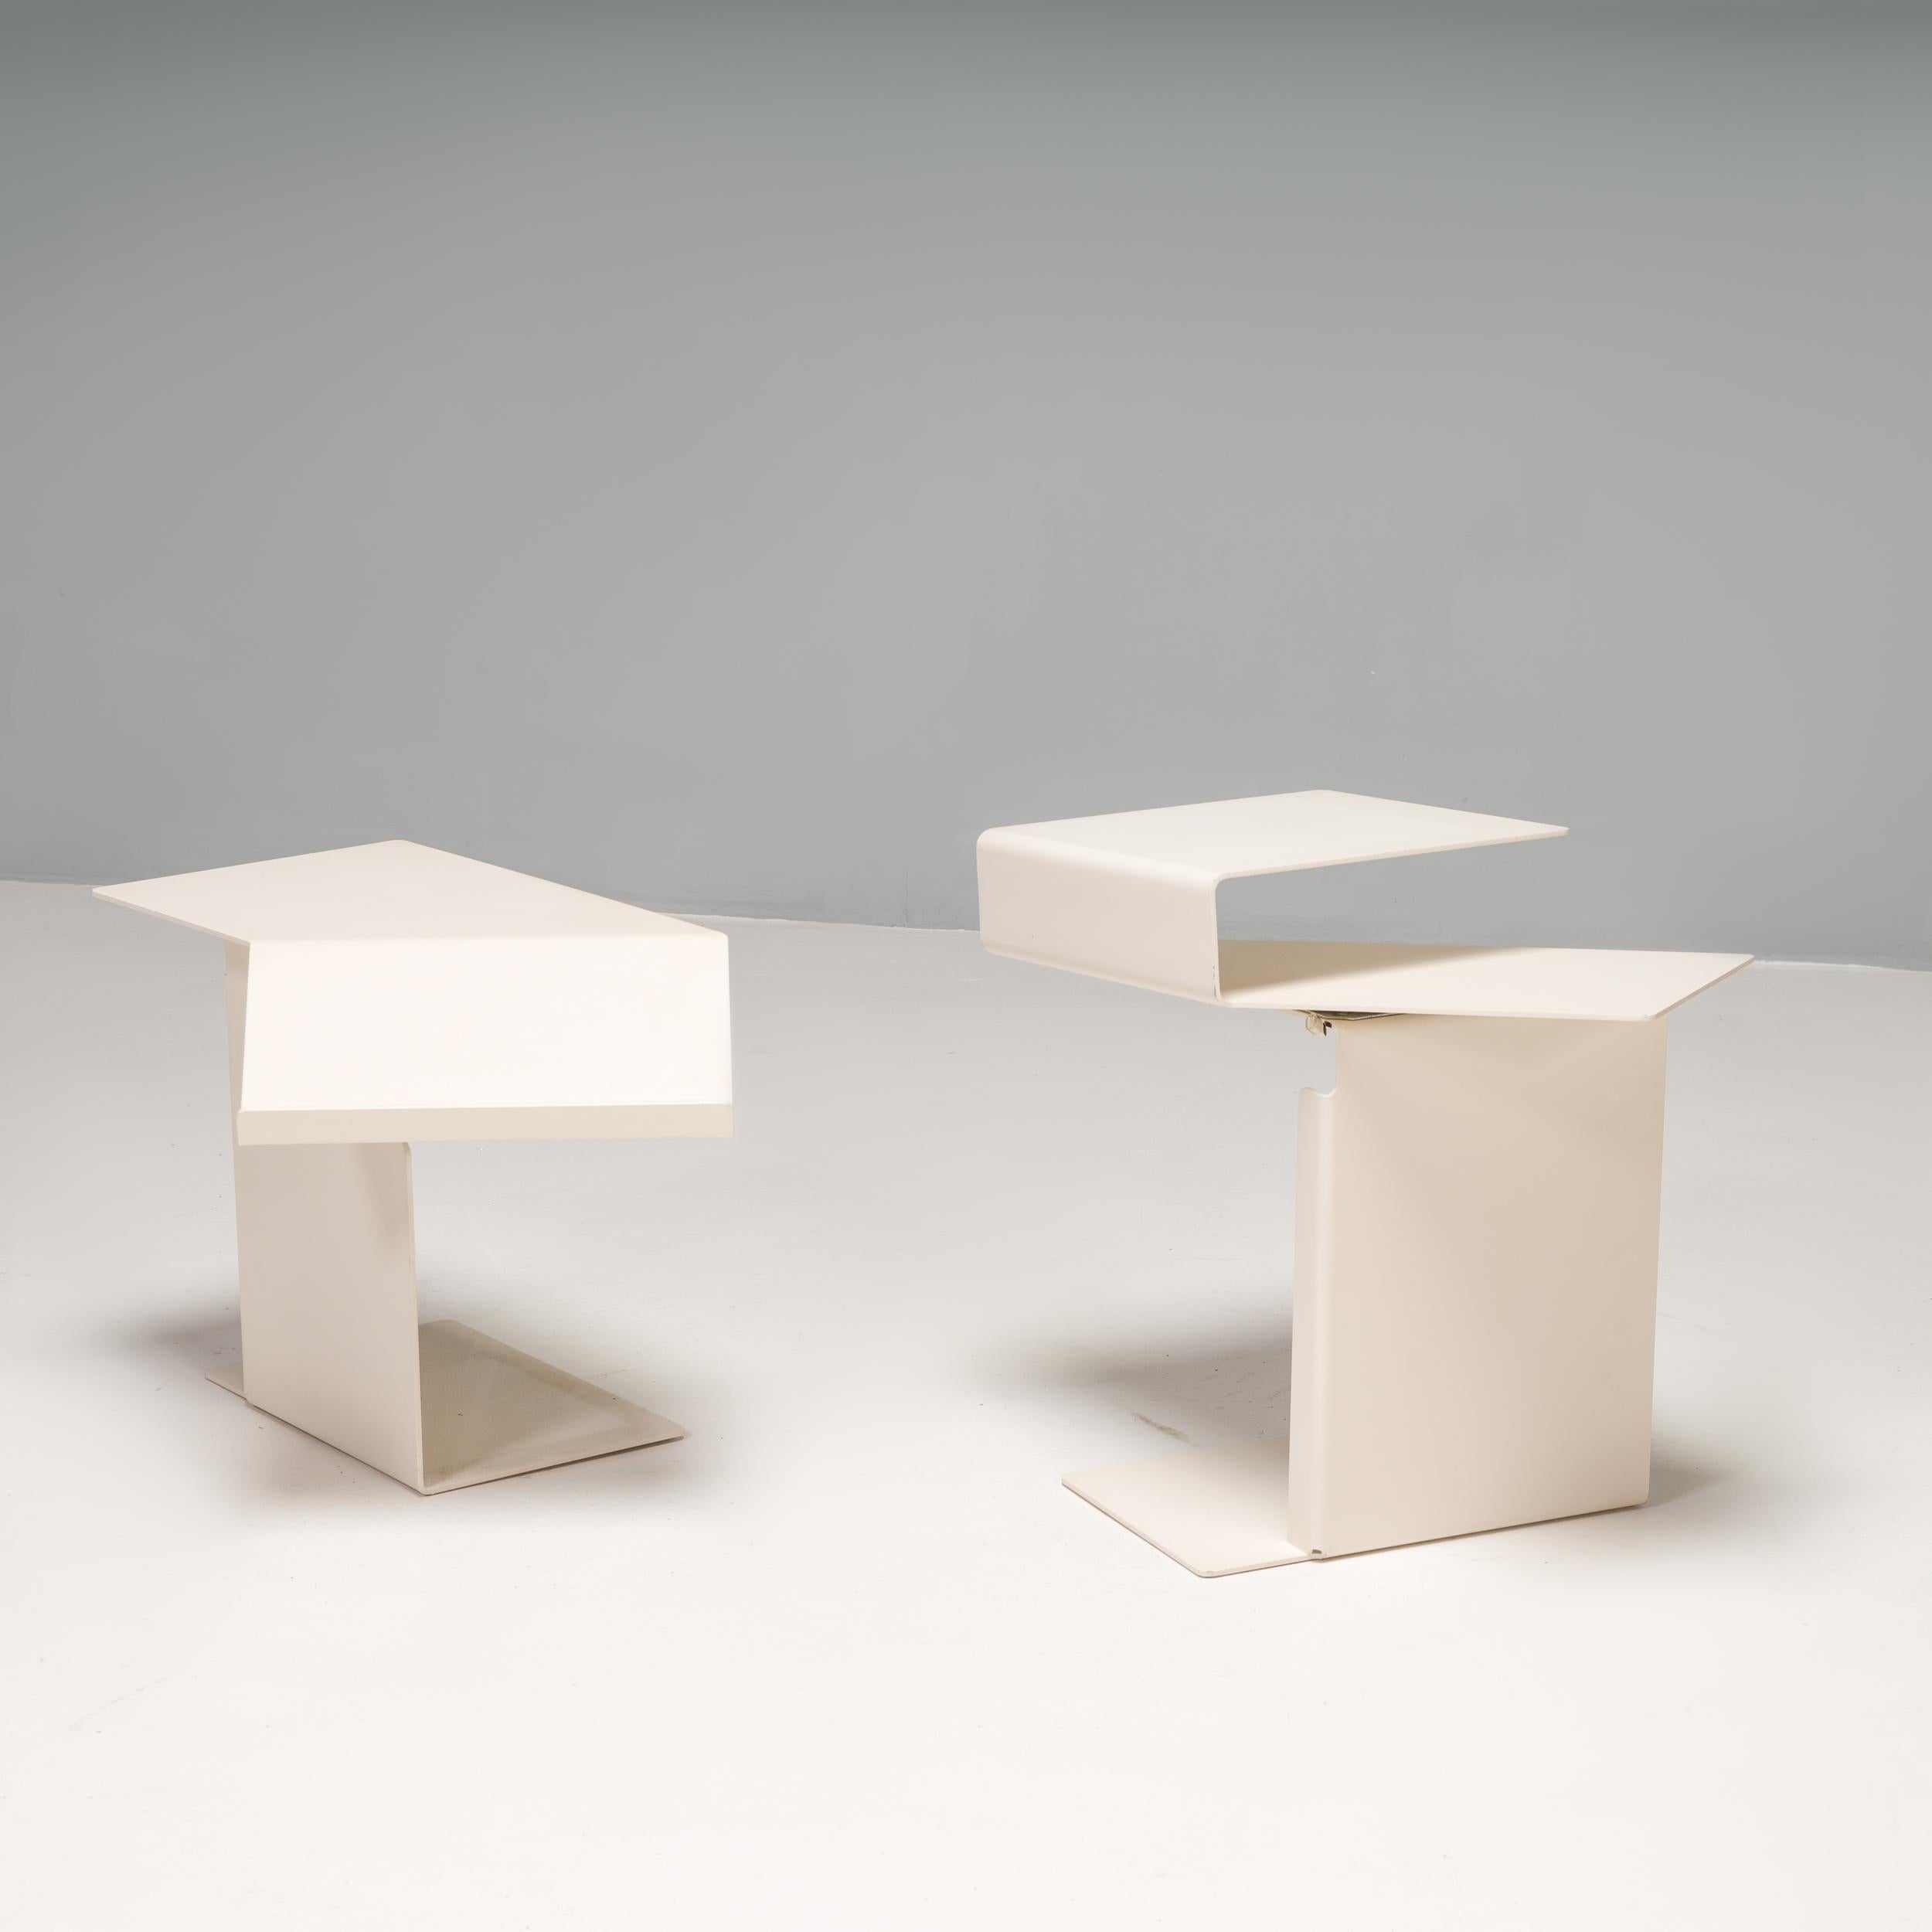 German Konstantin Grcic for Classicon Diana B White Side Tables, Set of 2